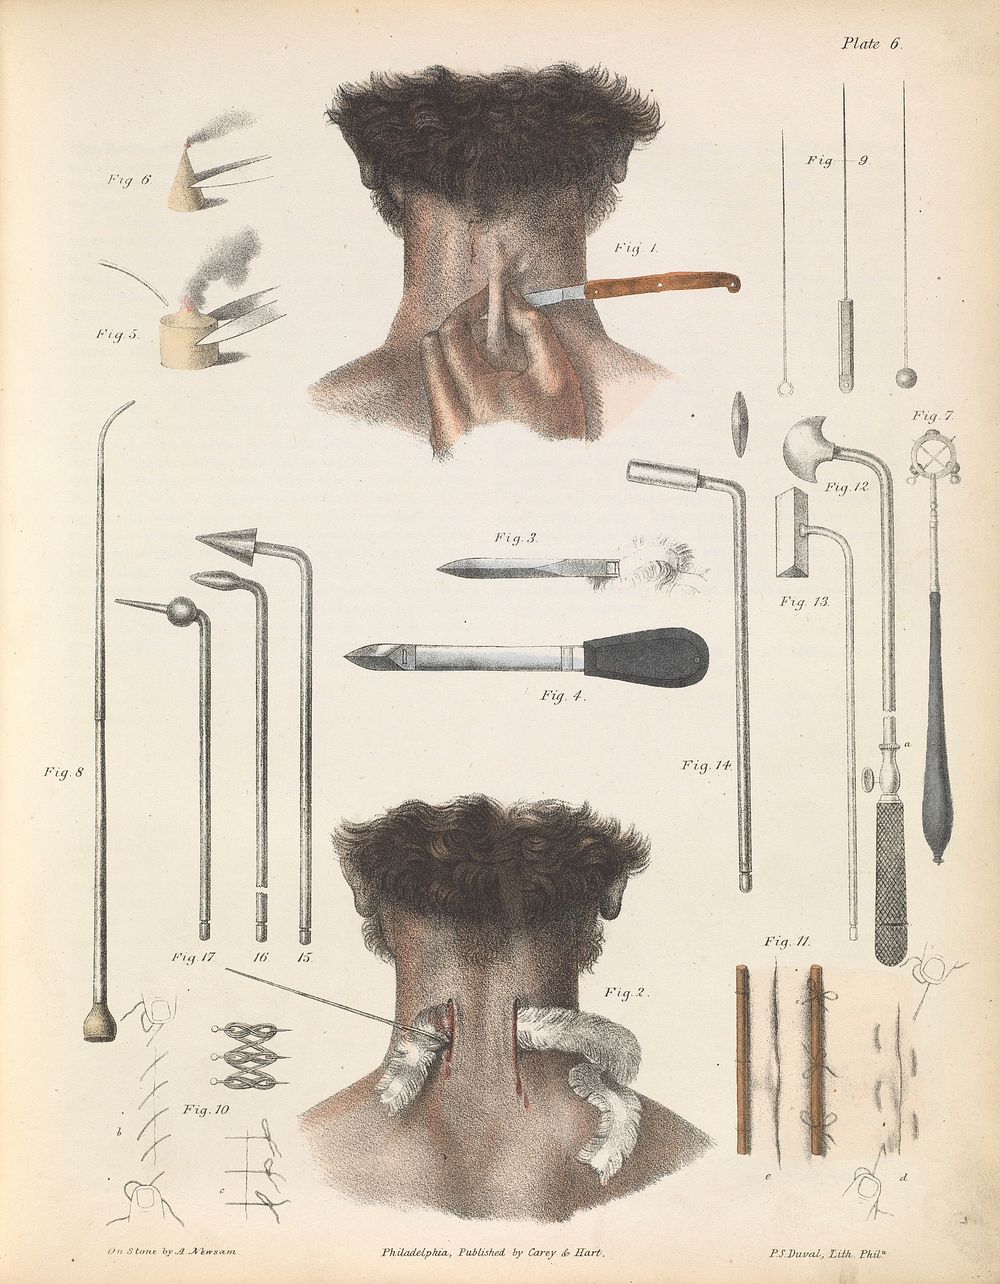 Plate VI. Various instruments and techniques used in surgery. Illustration of seton, moxa, acupuntcture needles, sutures…